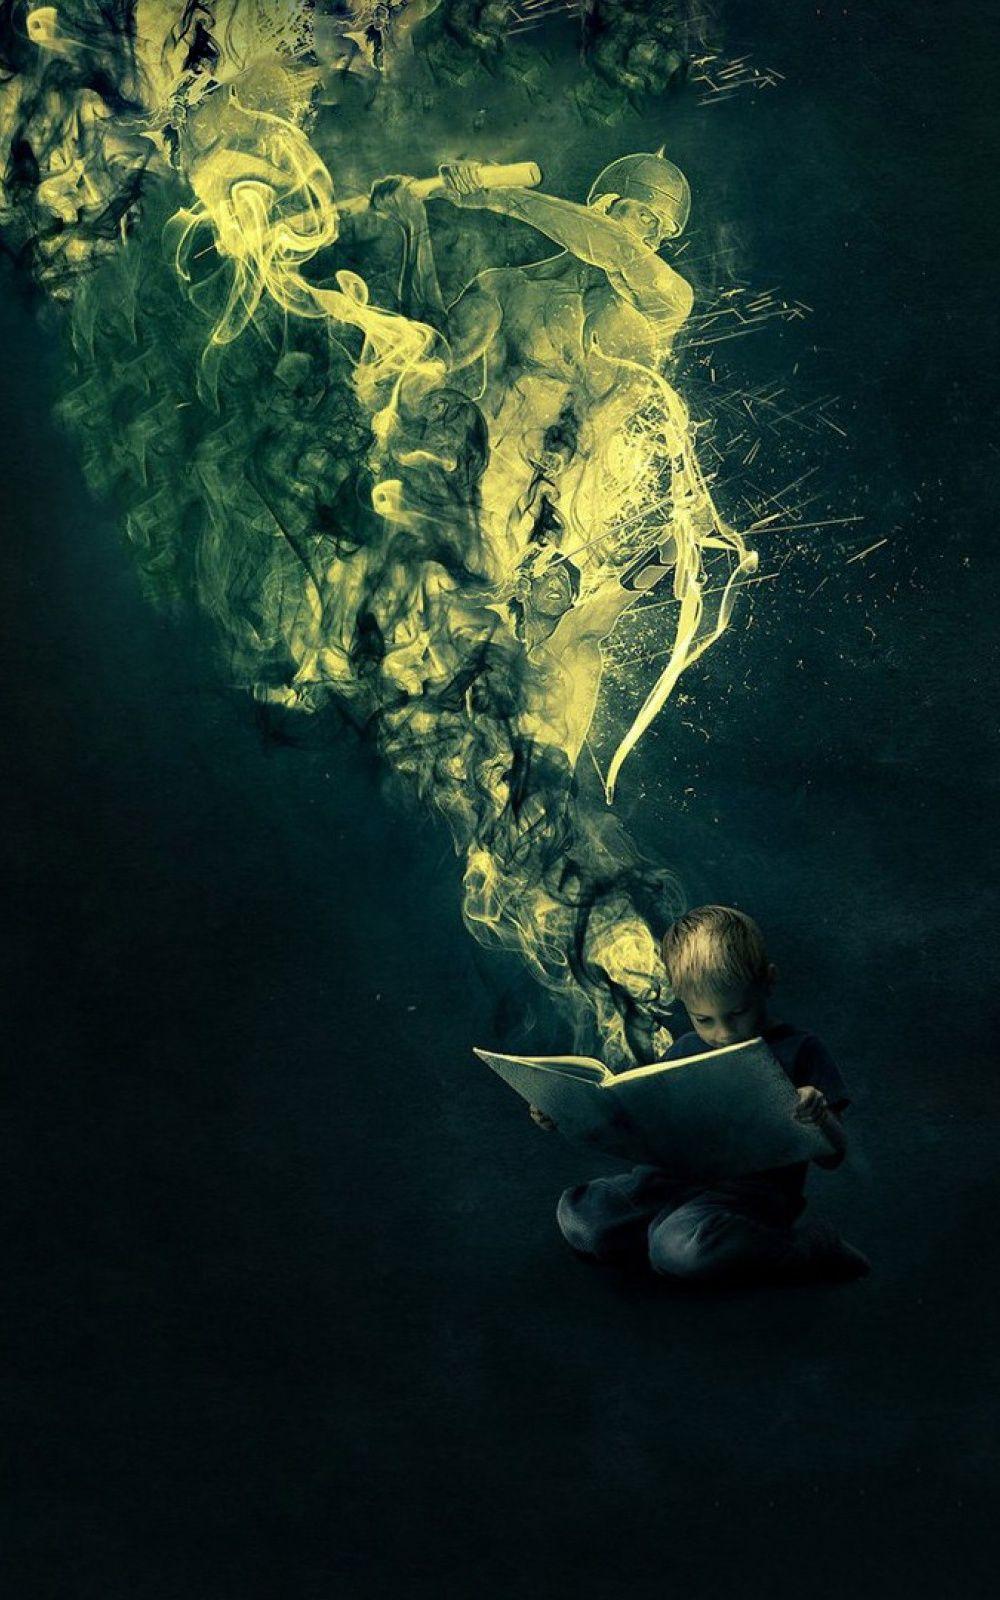 Fantasy Book Reading Boy Android Wallpapers free download